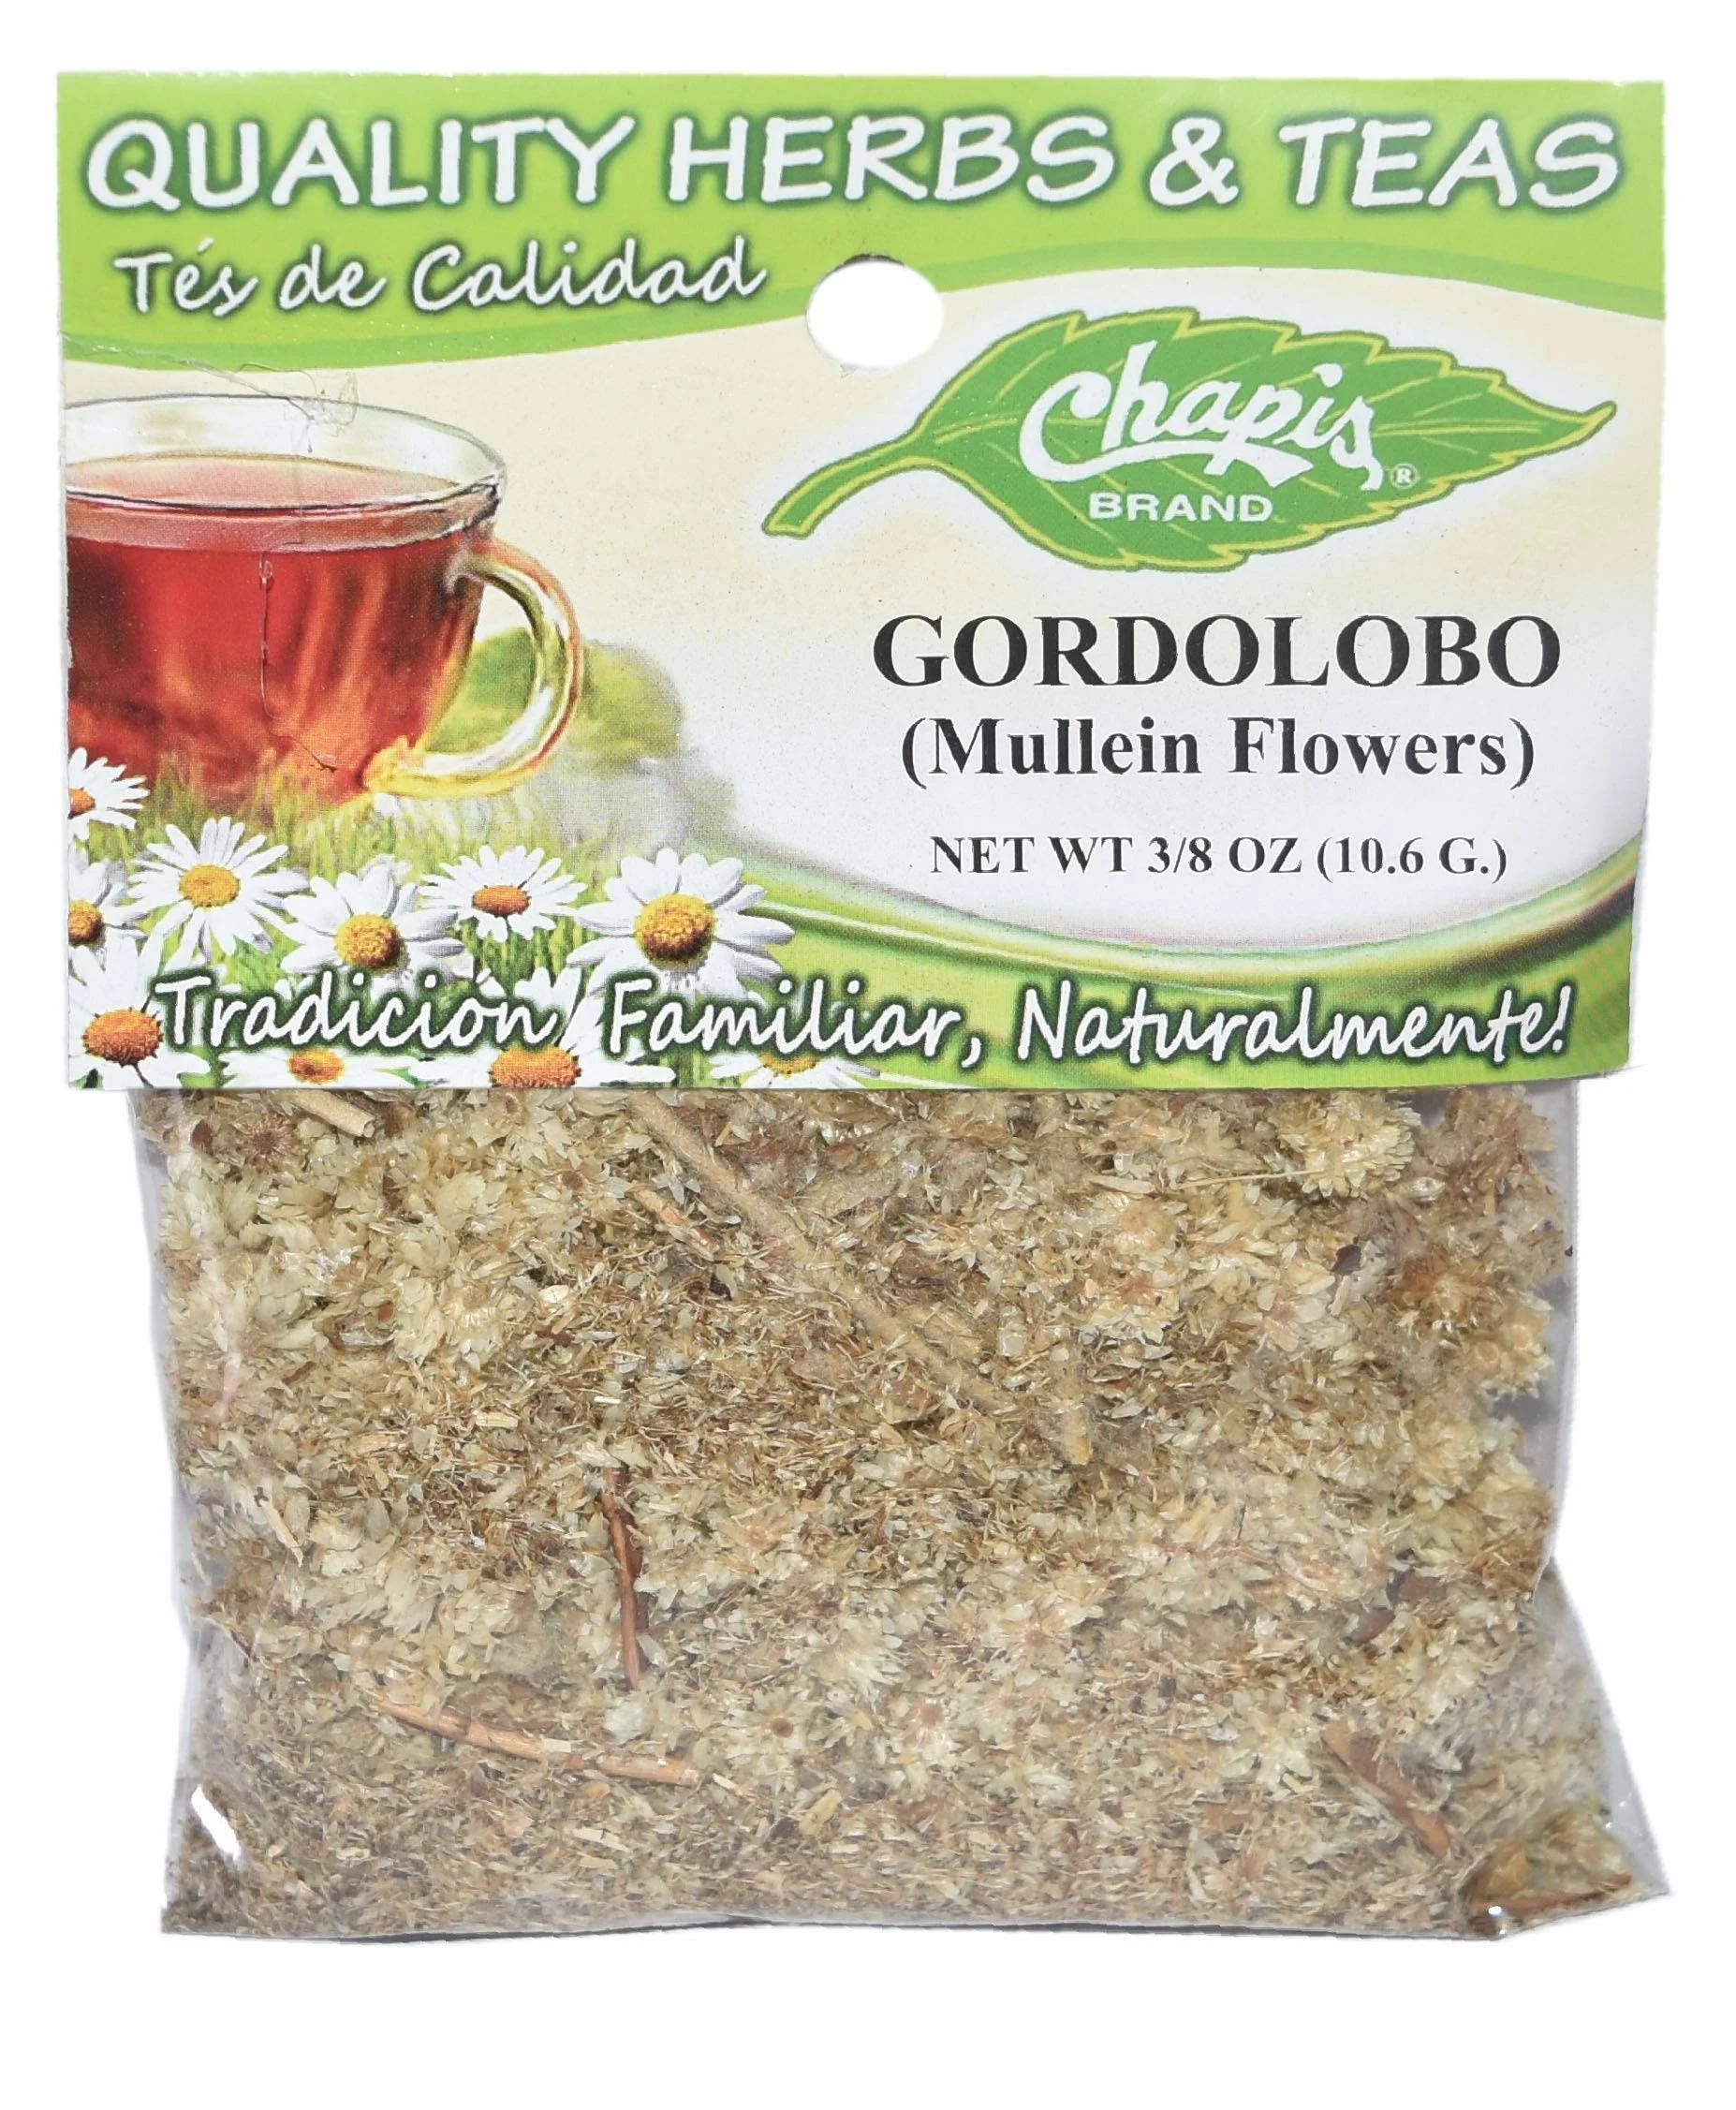 Naturally Decaffeinated Mullein Tea Bags - Mexican Herbs | Image